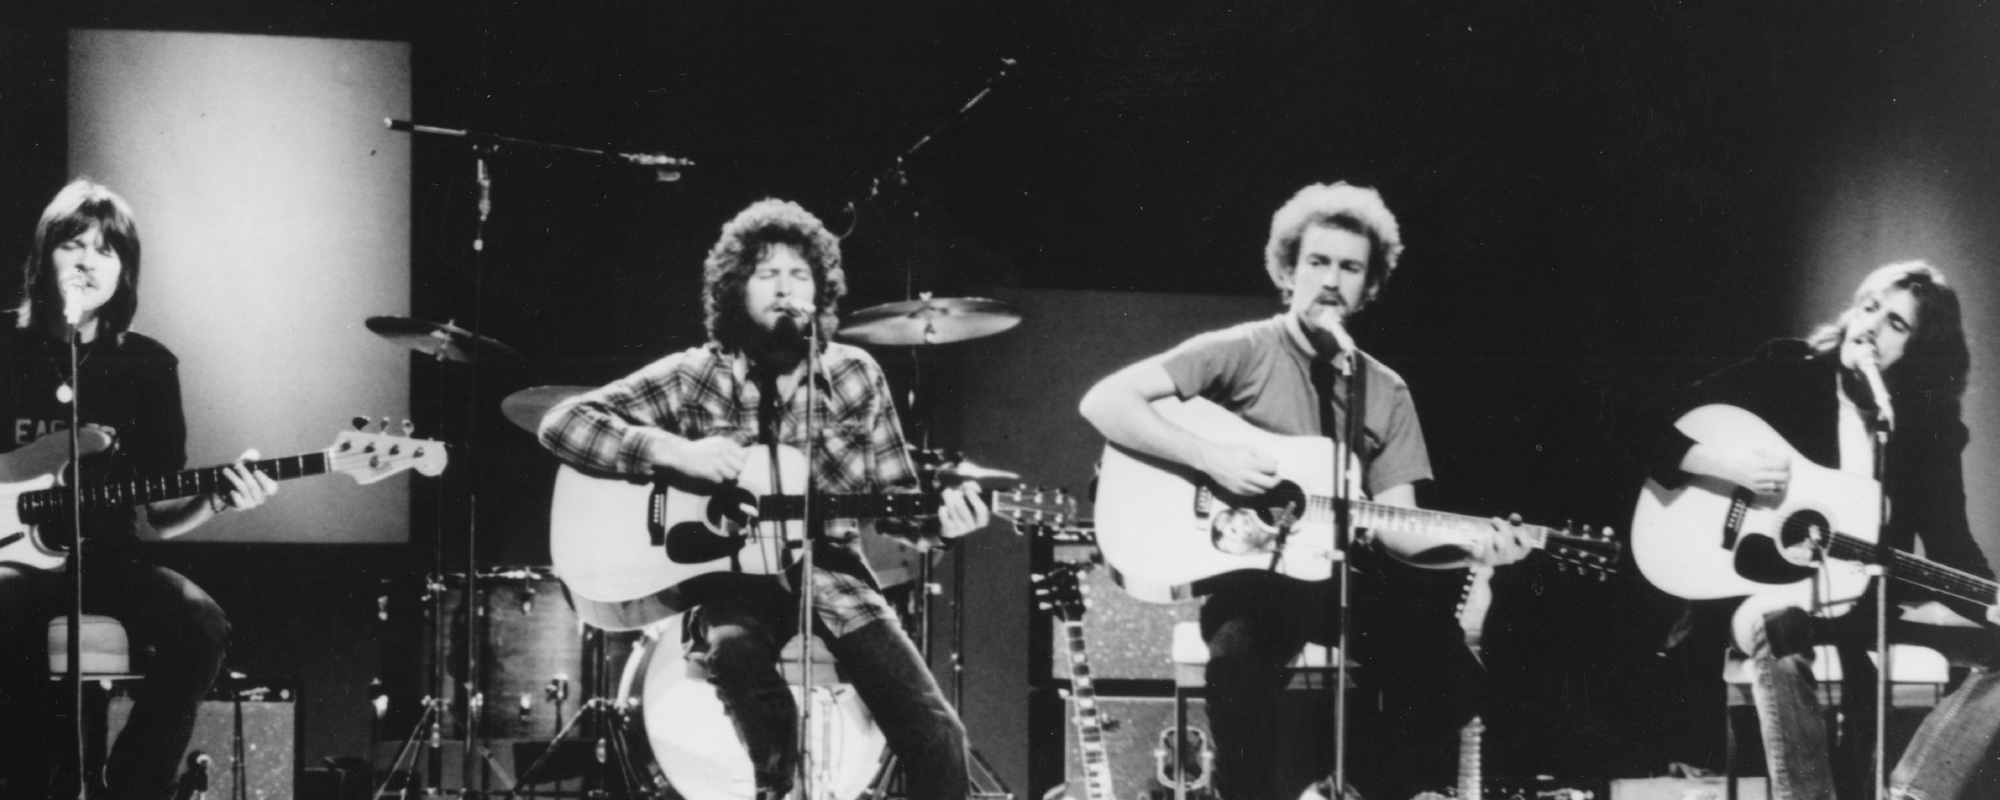 Here’s Why Don Henley Would Prefer People to Not Label the Eagles as “Country Rock”